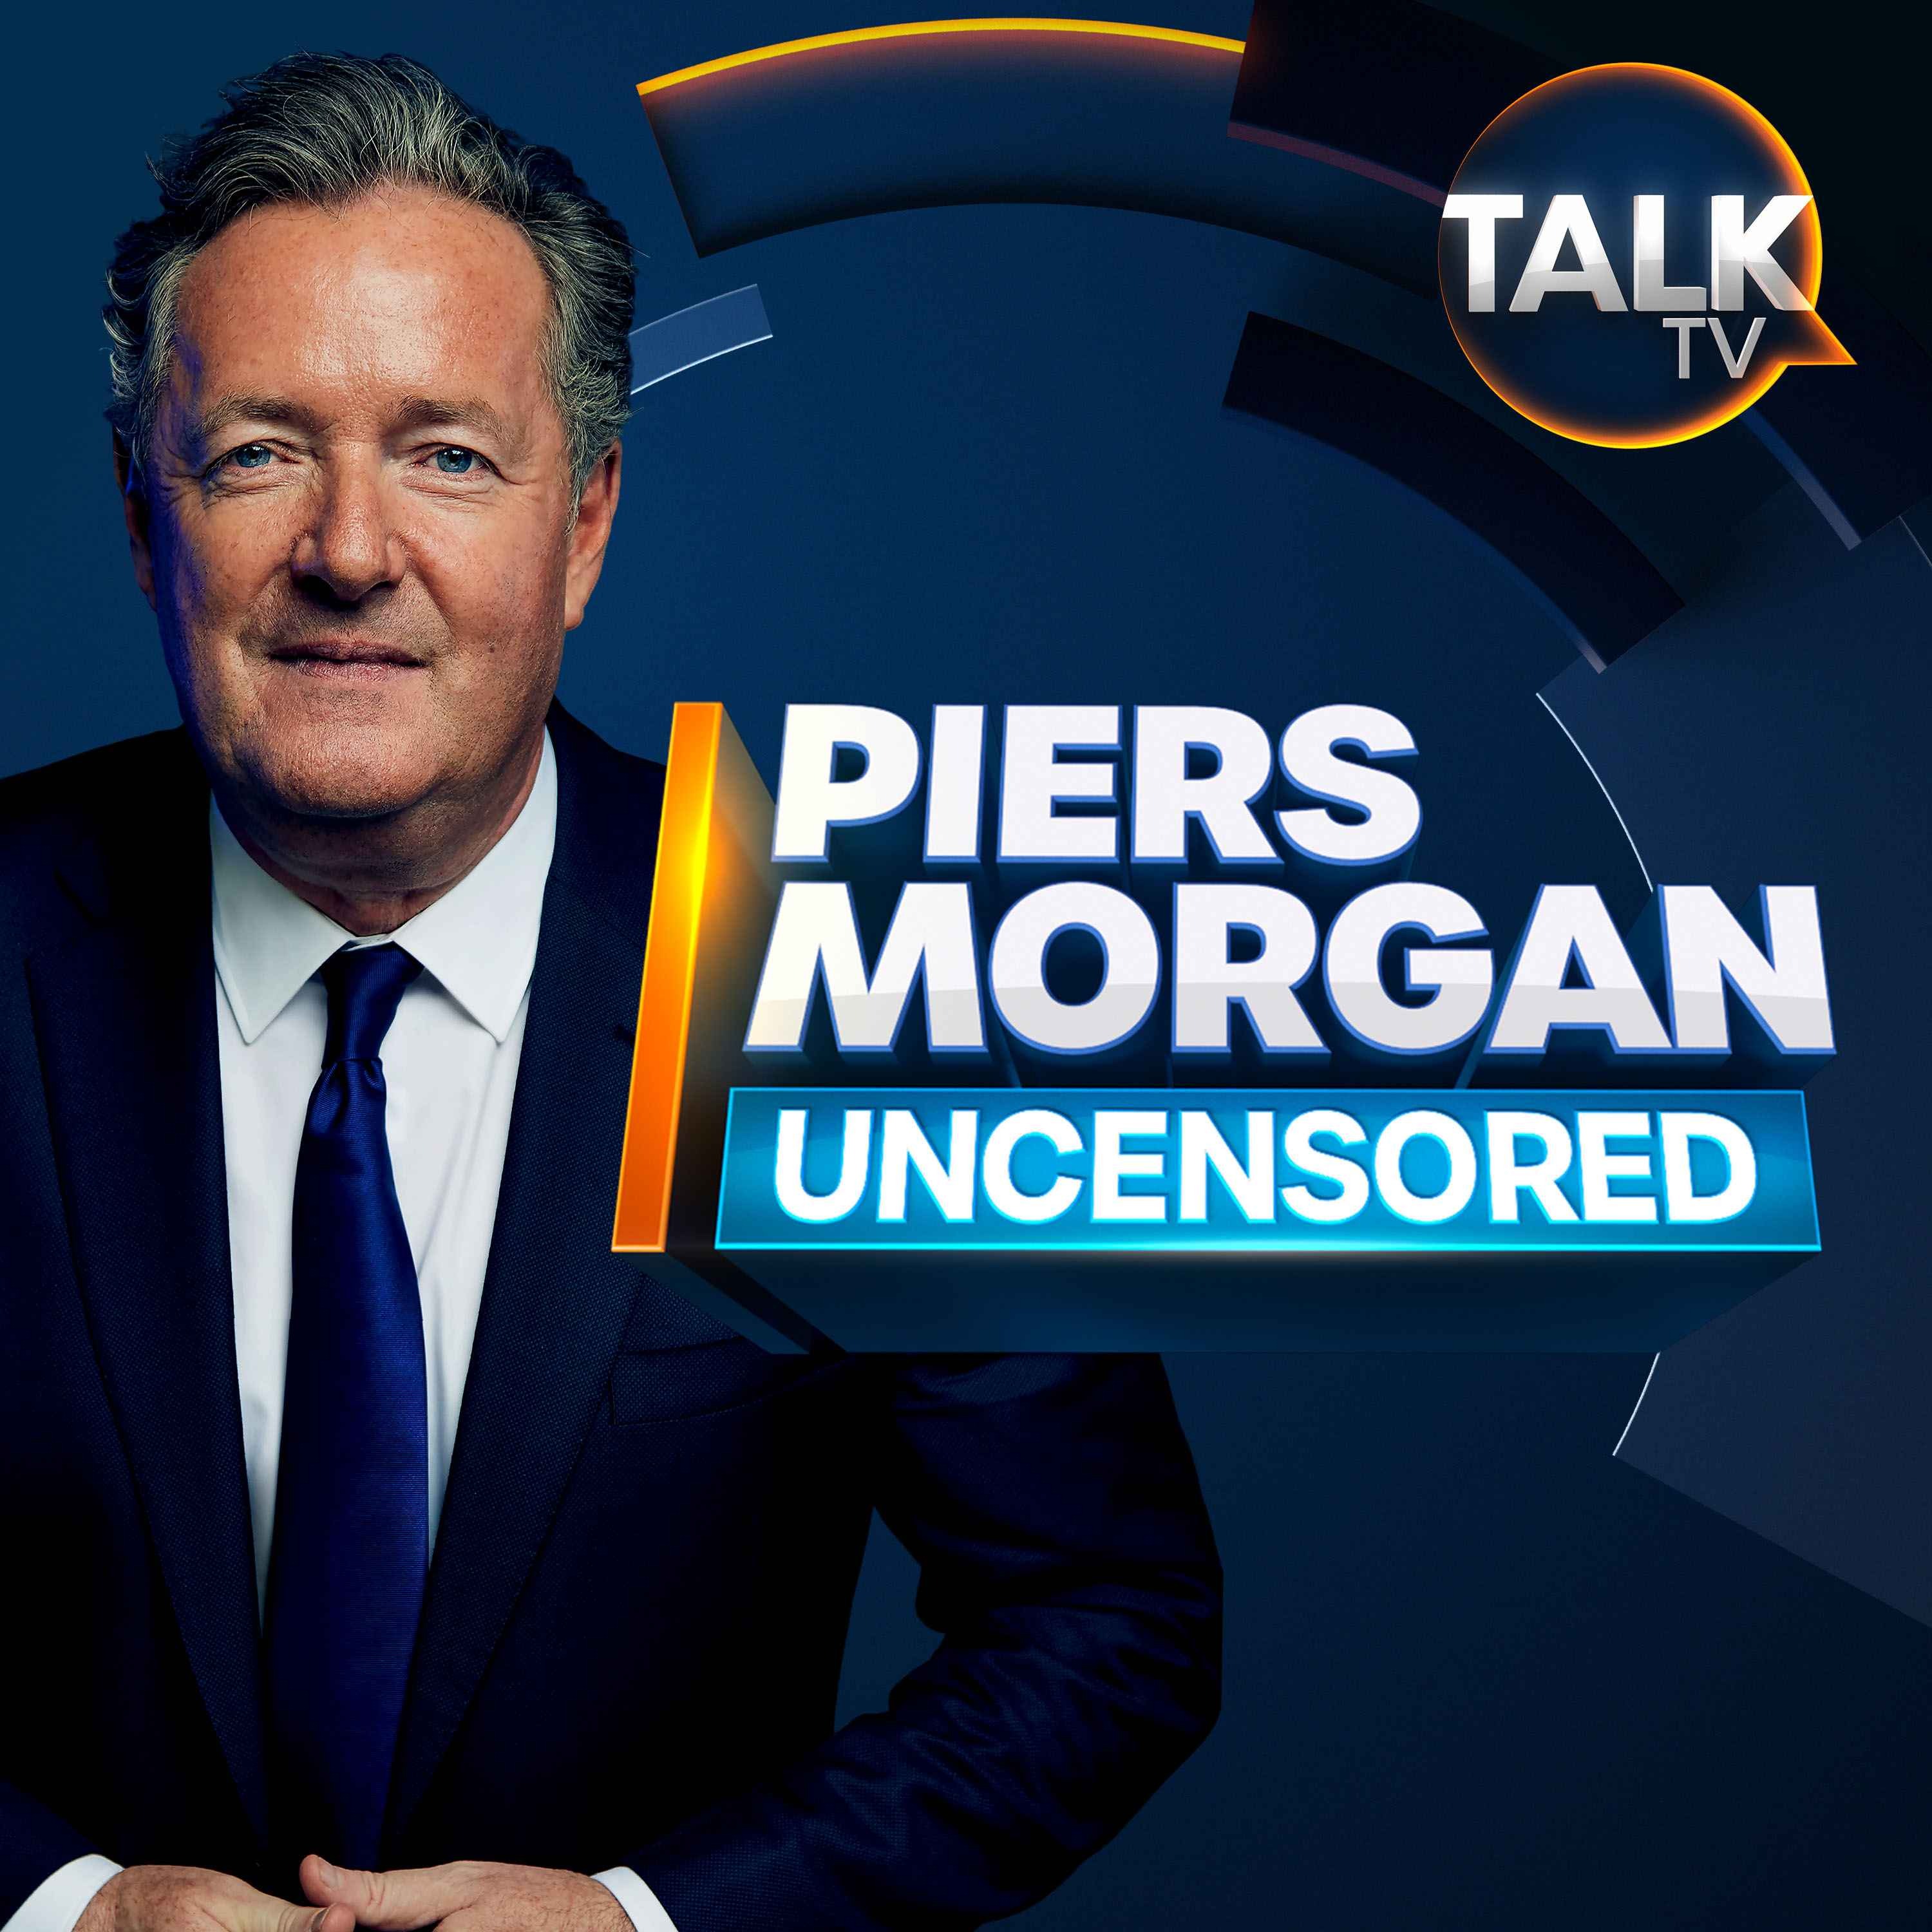 Piers Morgan Uncensored: Oxfam TERF Row, Dale Vince and Imran Khan